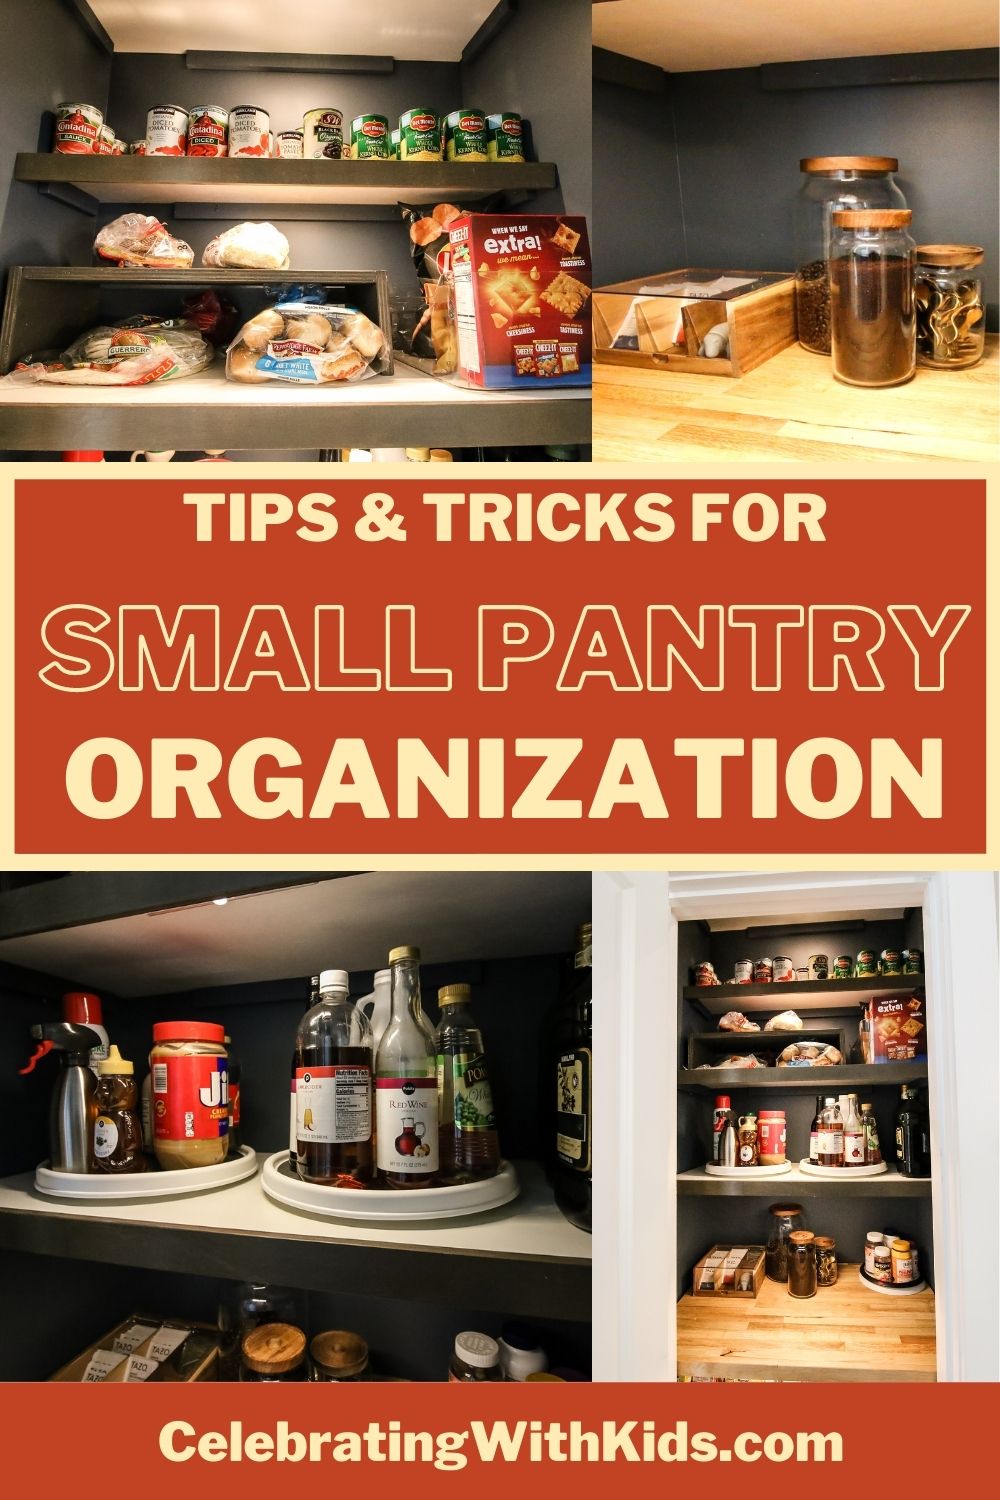 https://www.charlestoncrafted.com/wp-content/uploads/2021/08/tips-and-tricks-for-small-pantry-organization.jpg